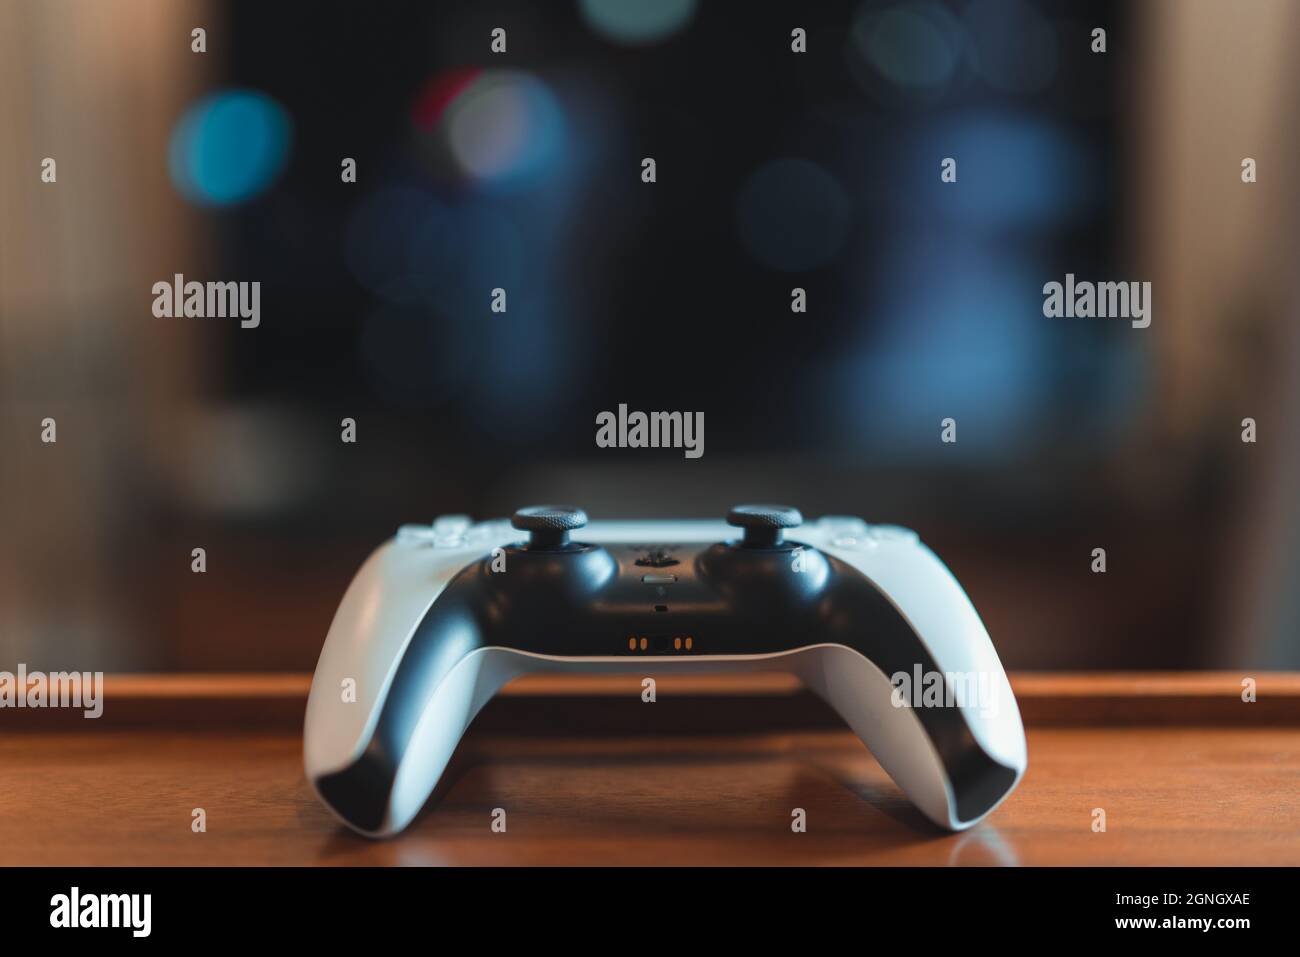 London, UK - May 25, 2021: One white Playstation 5 (PS5) controller on the table, tv on background, selective focus. Playstation 5 is the latest video Stock Photo